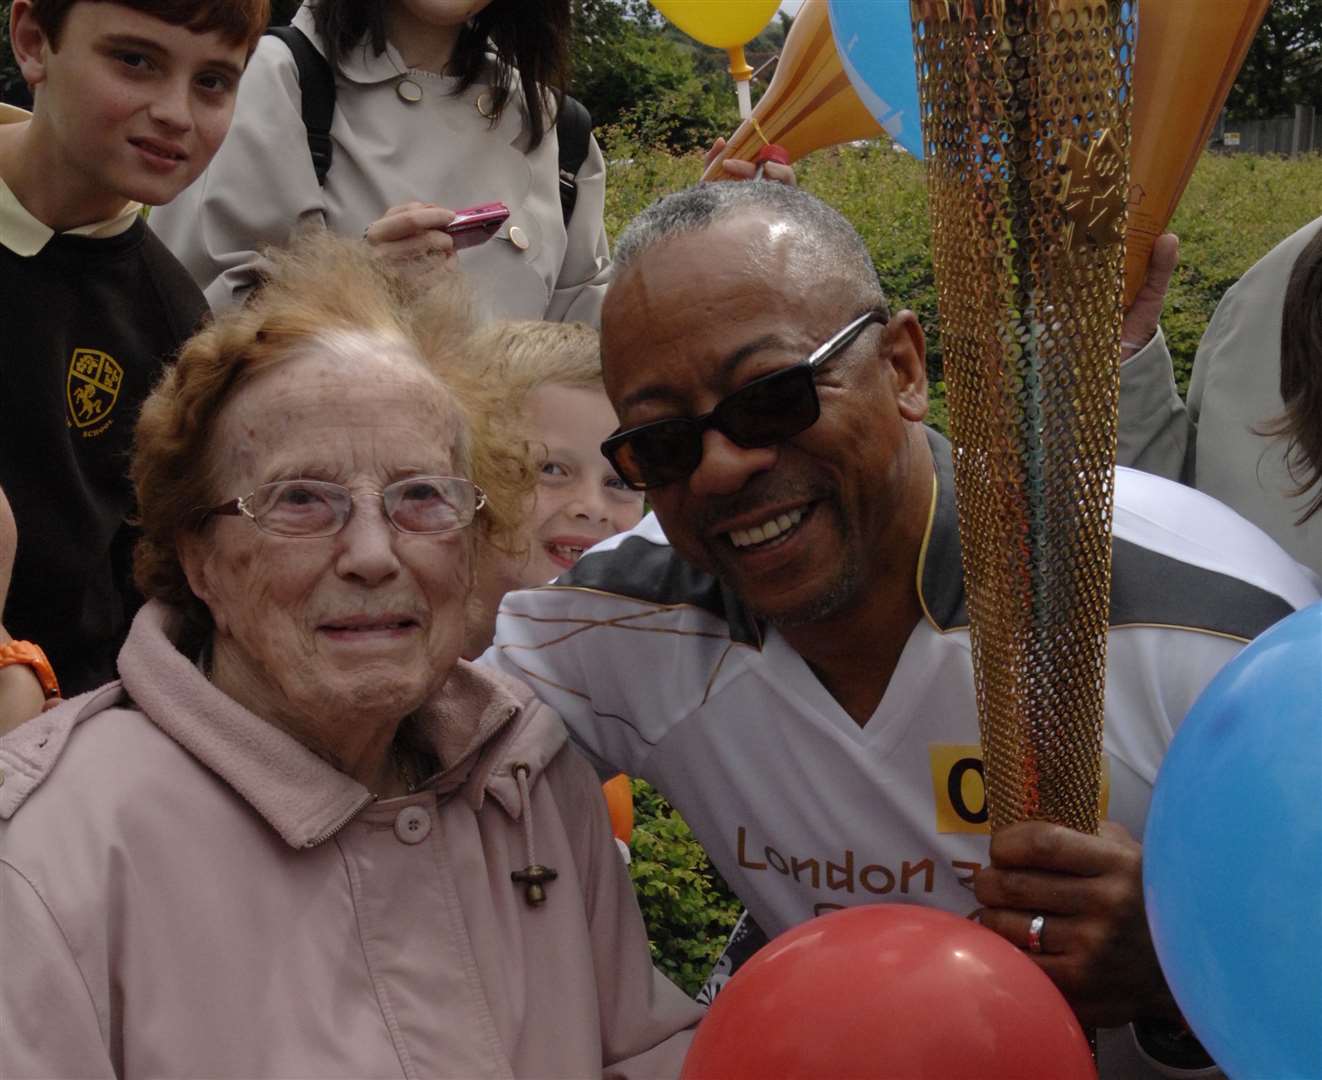 Jean Holton, who turned 90 just weeks later, meets torchbearer George Hamilton. Jean saw the Olympic flame in London in 1948